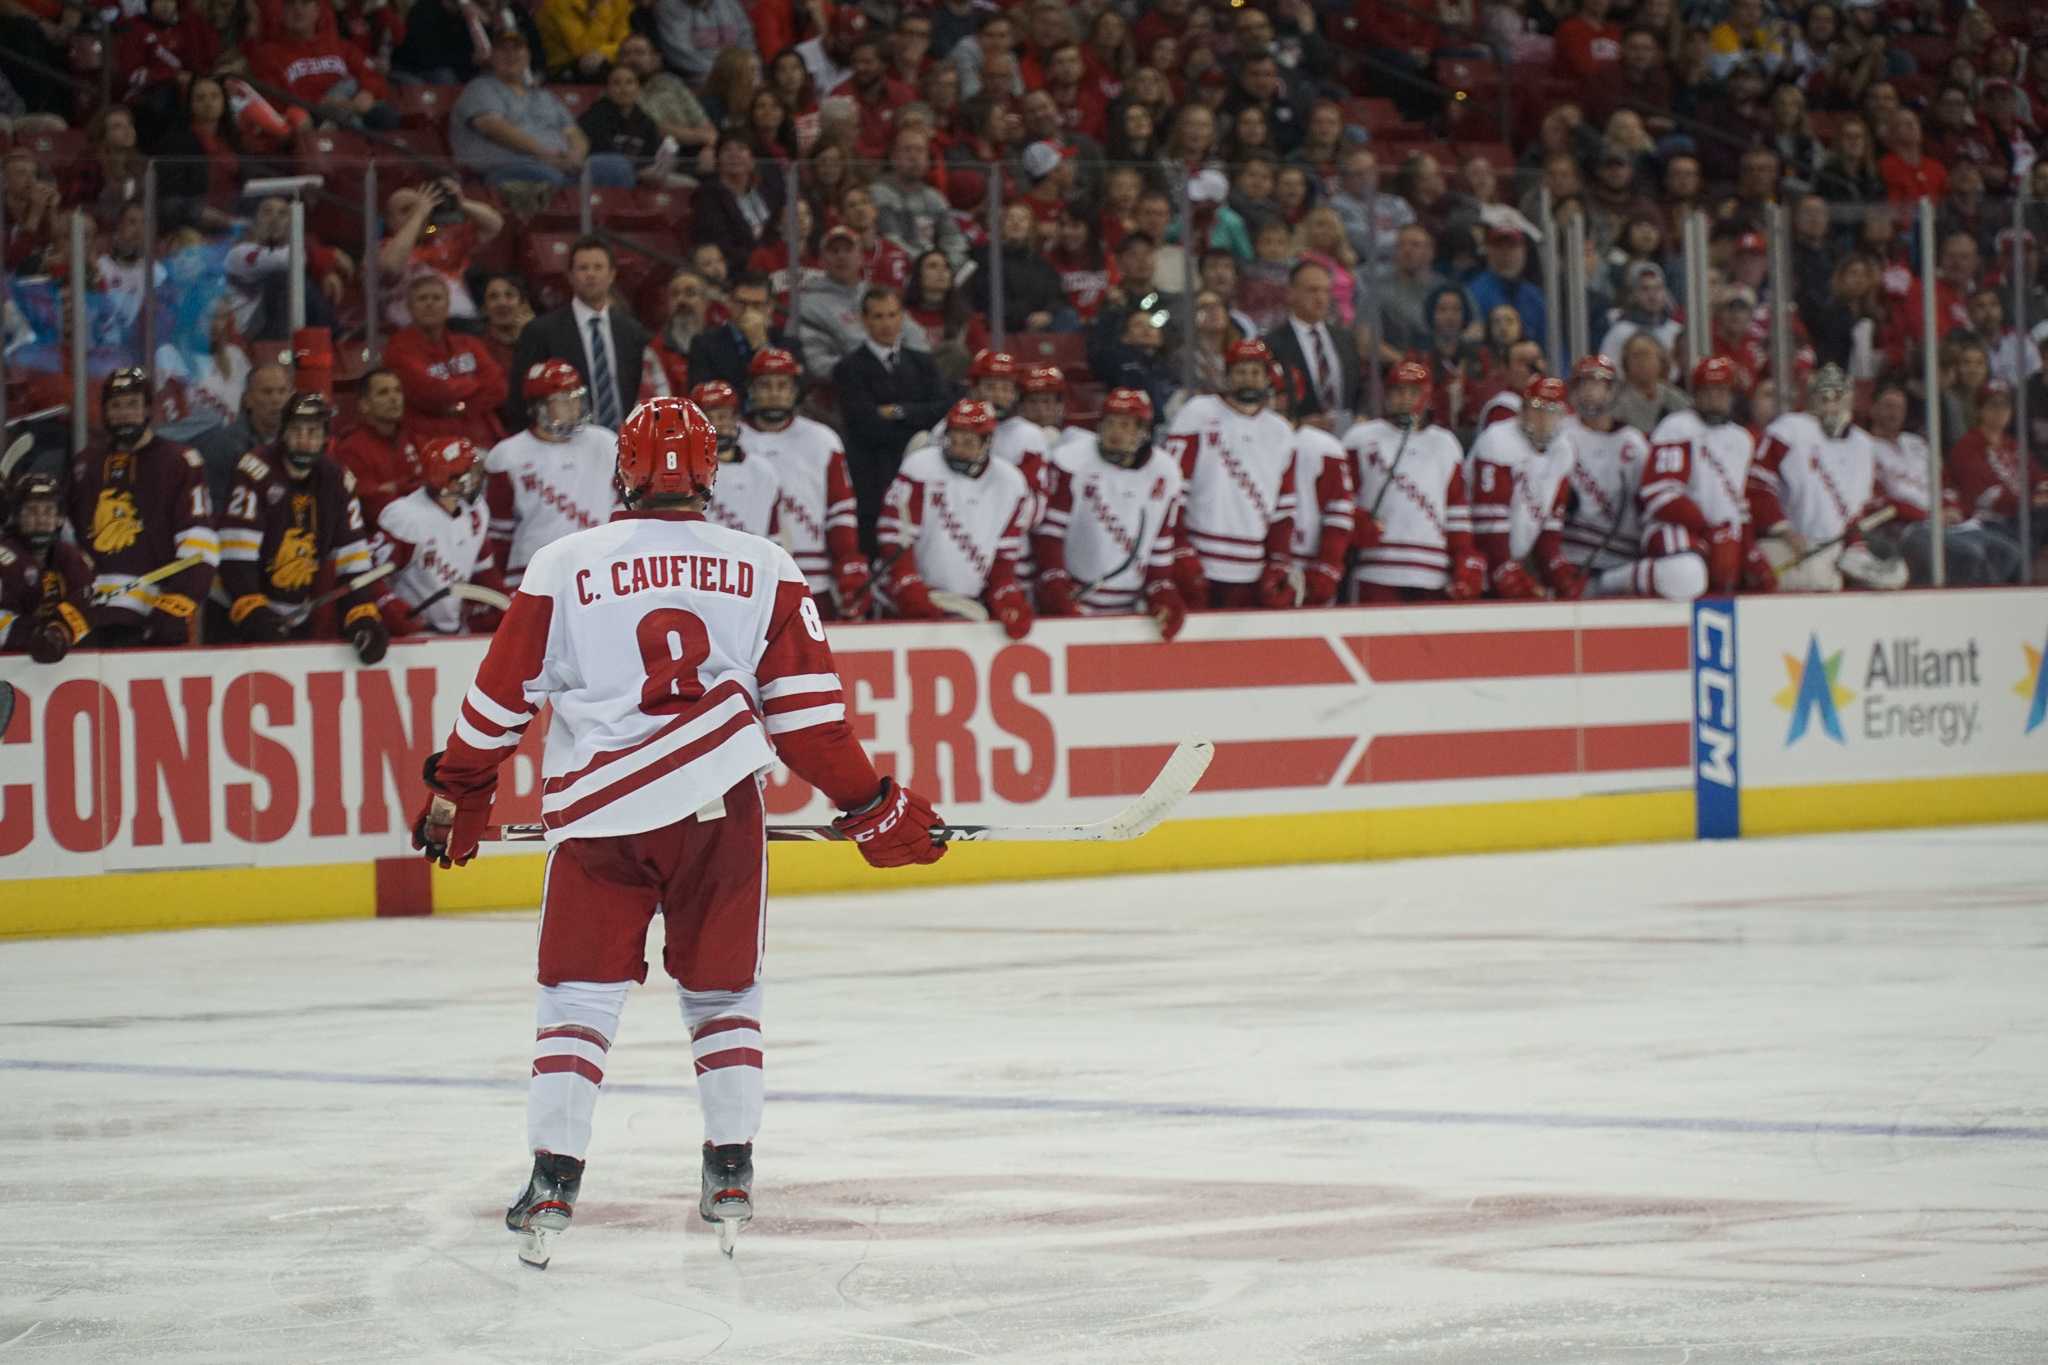 Men's Hockey: Wisconsin forward Dylan Holloway selected by Oilers